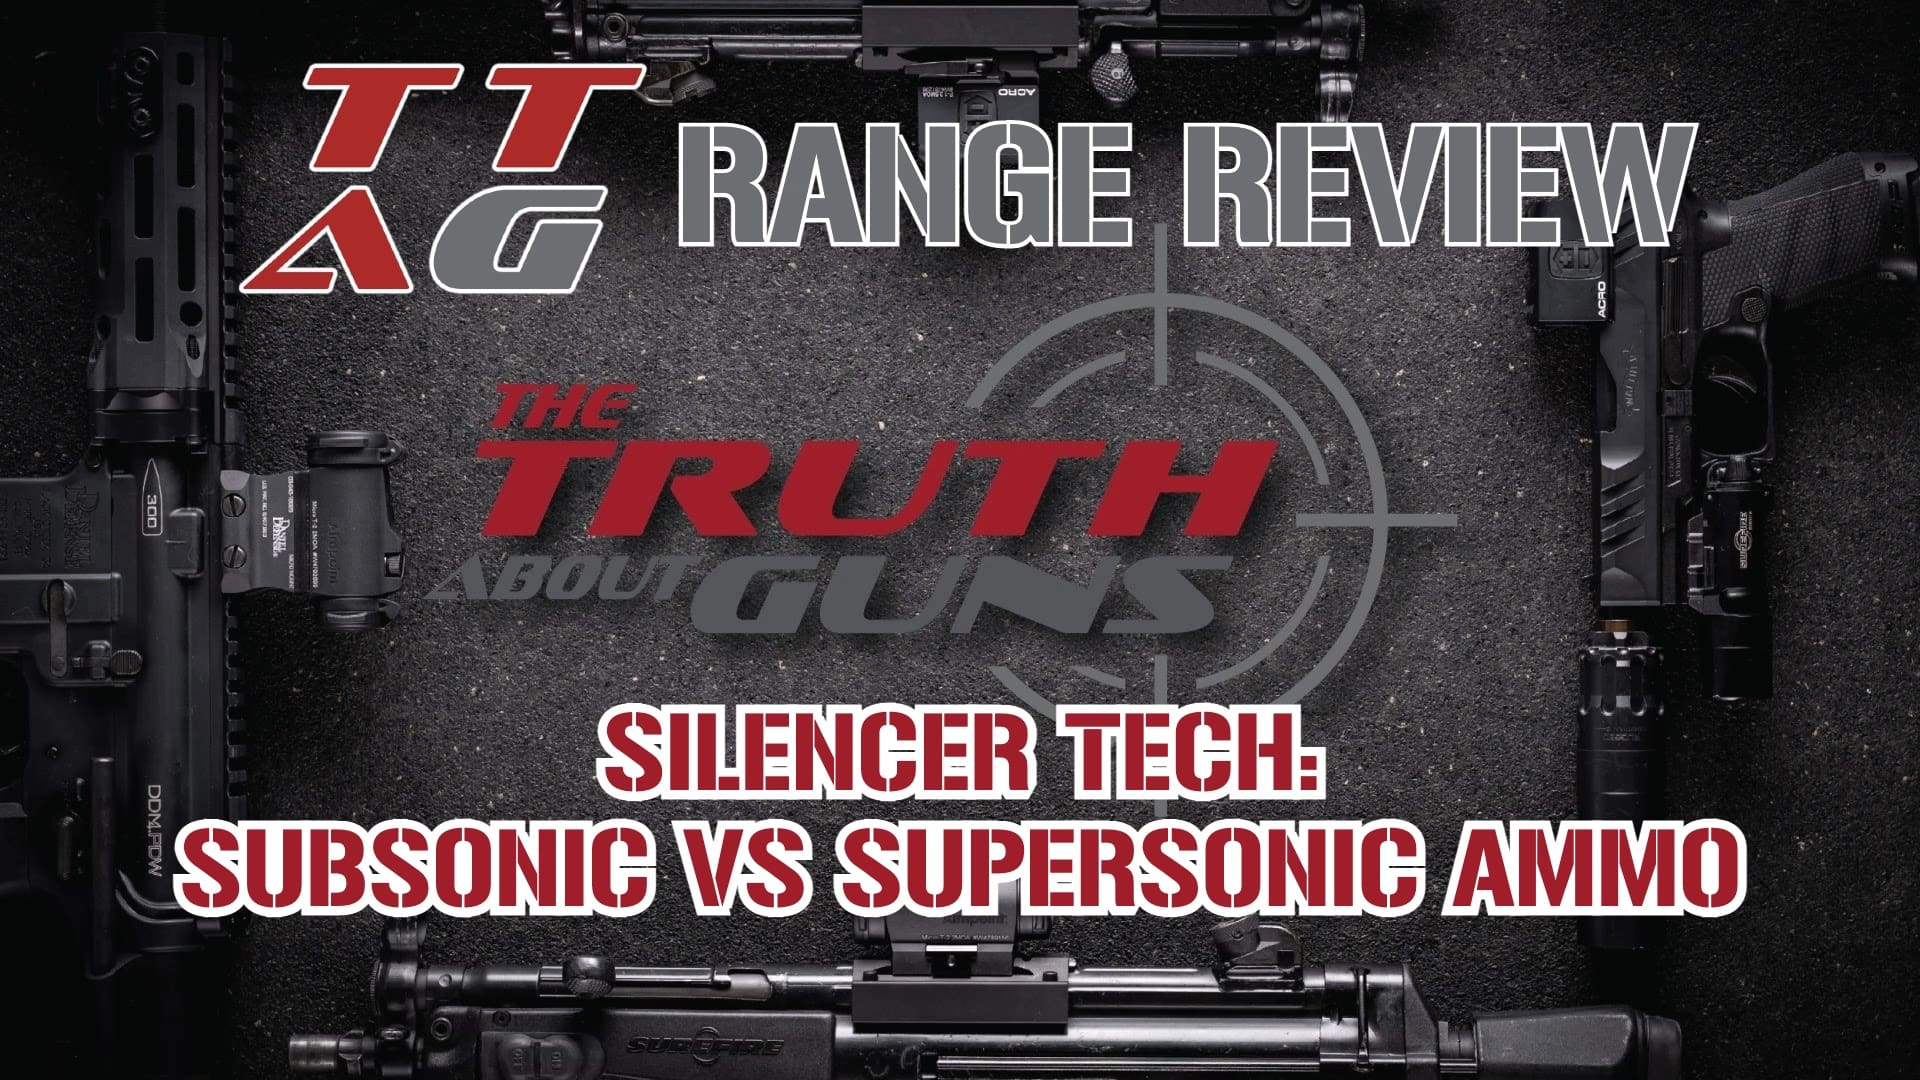 supersonic vs subsonic from a supressed rifle